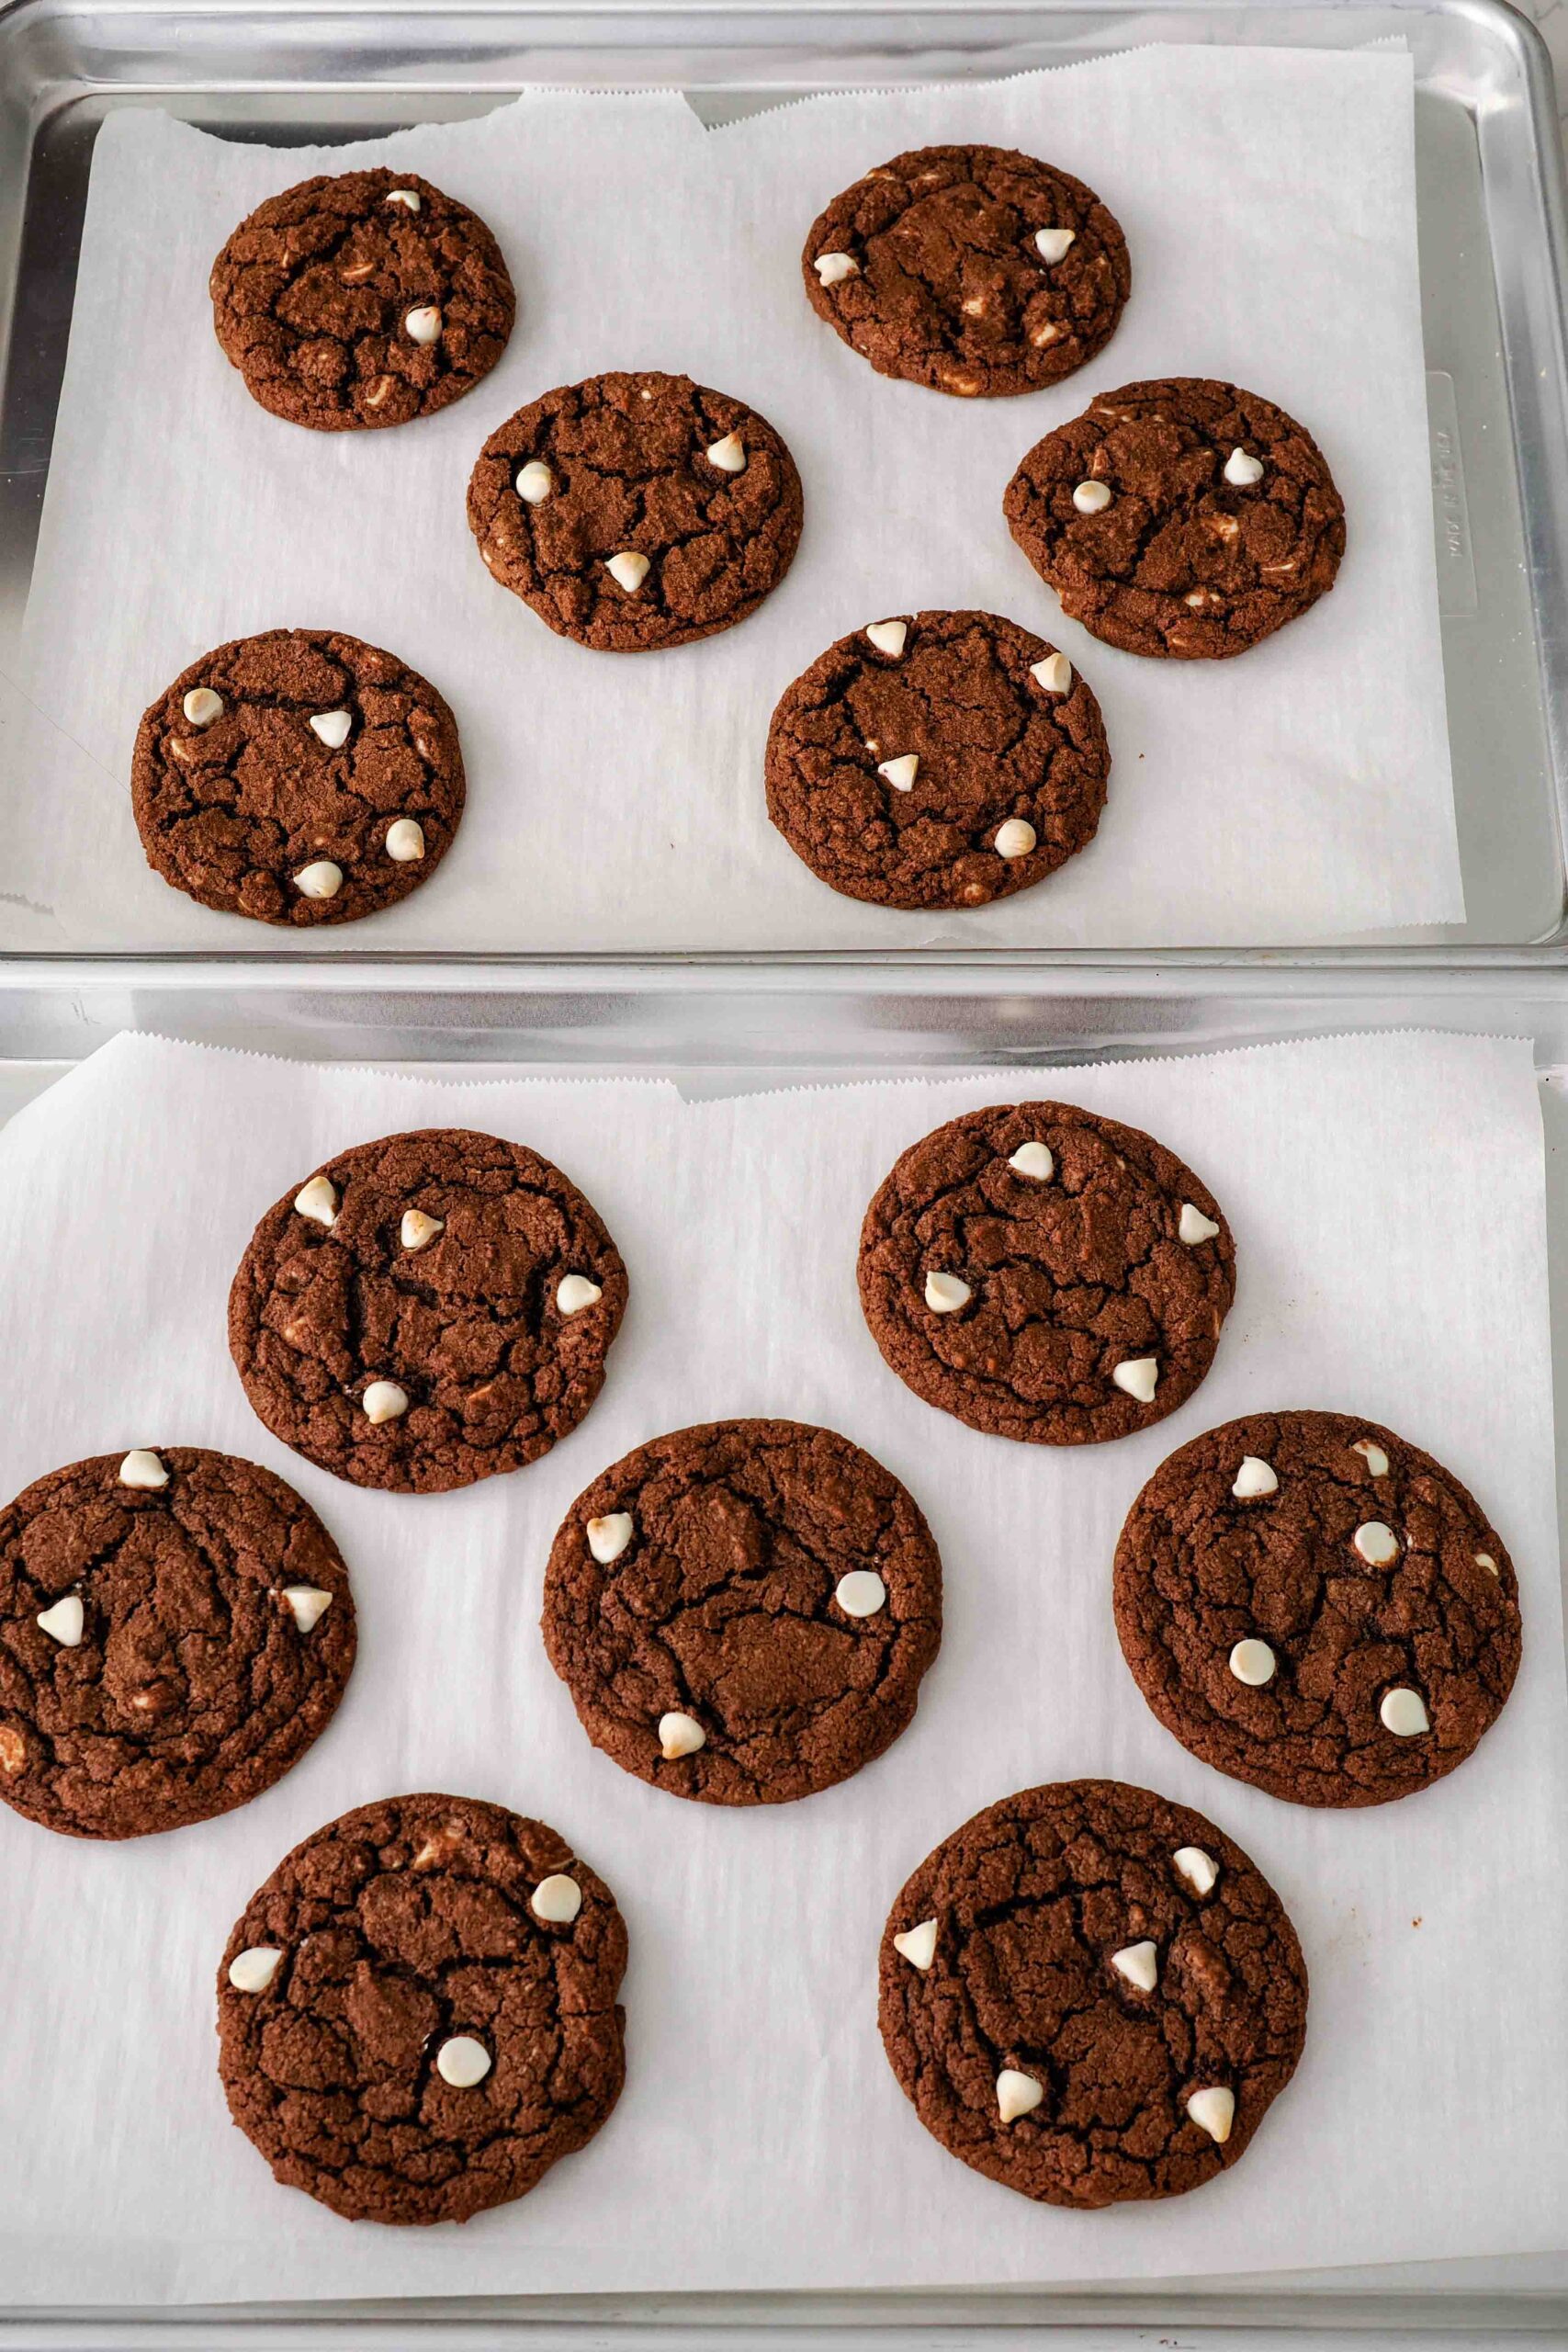 Baked chocolate peppermint cookies on parchment-lined baking sheets.